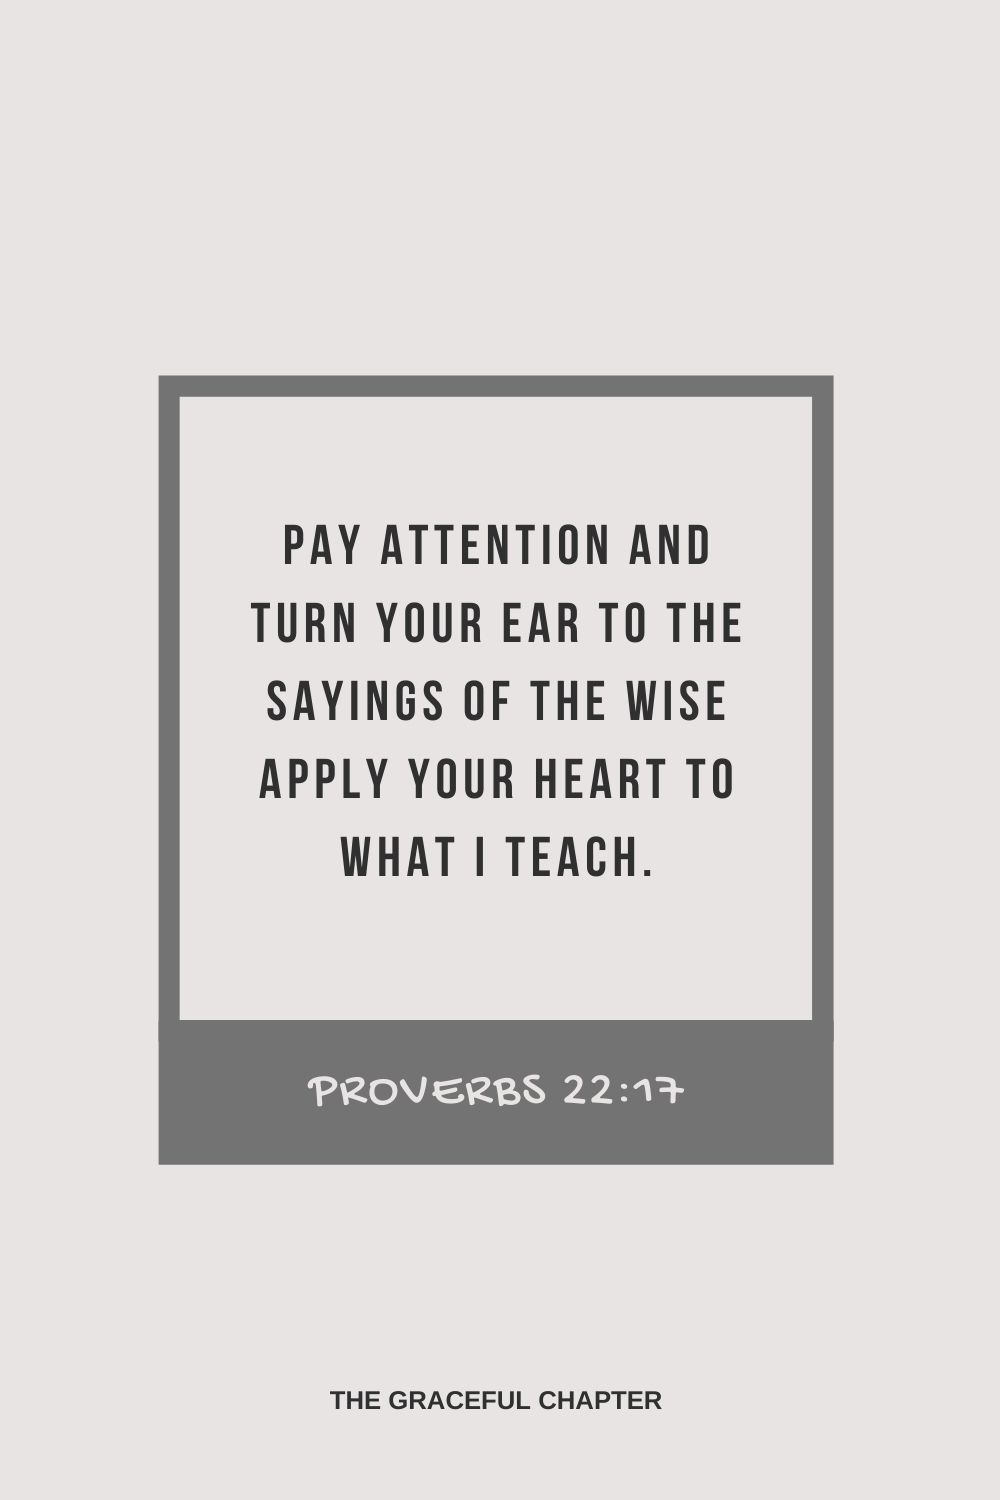 Pay attention and turn your ear to the sayings of the wise apply your heart to what I teach. Proverbs 22:17